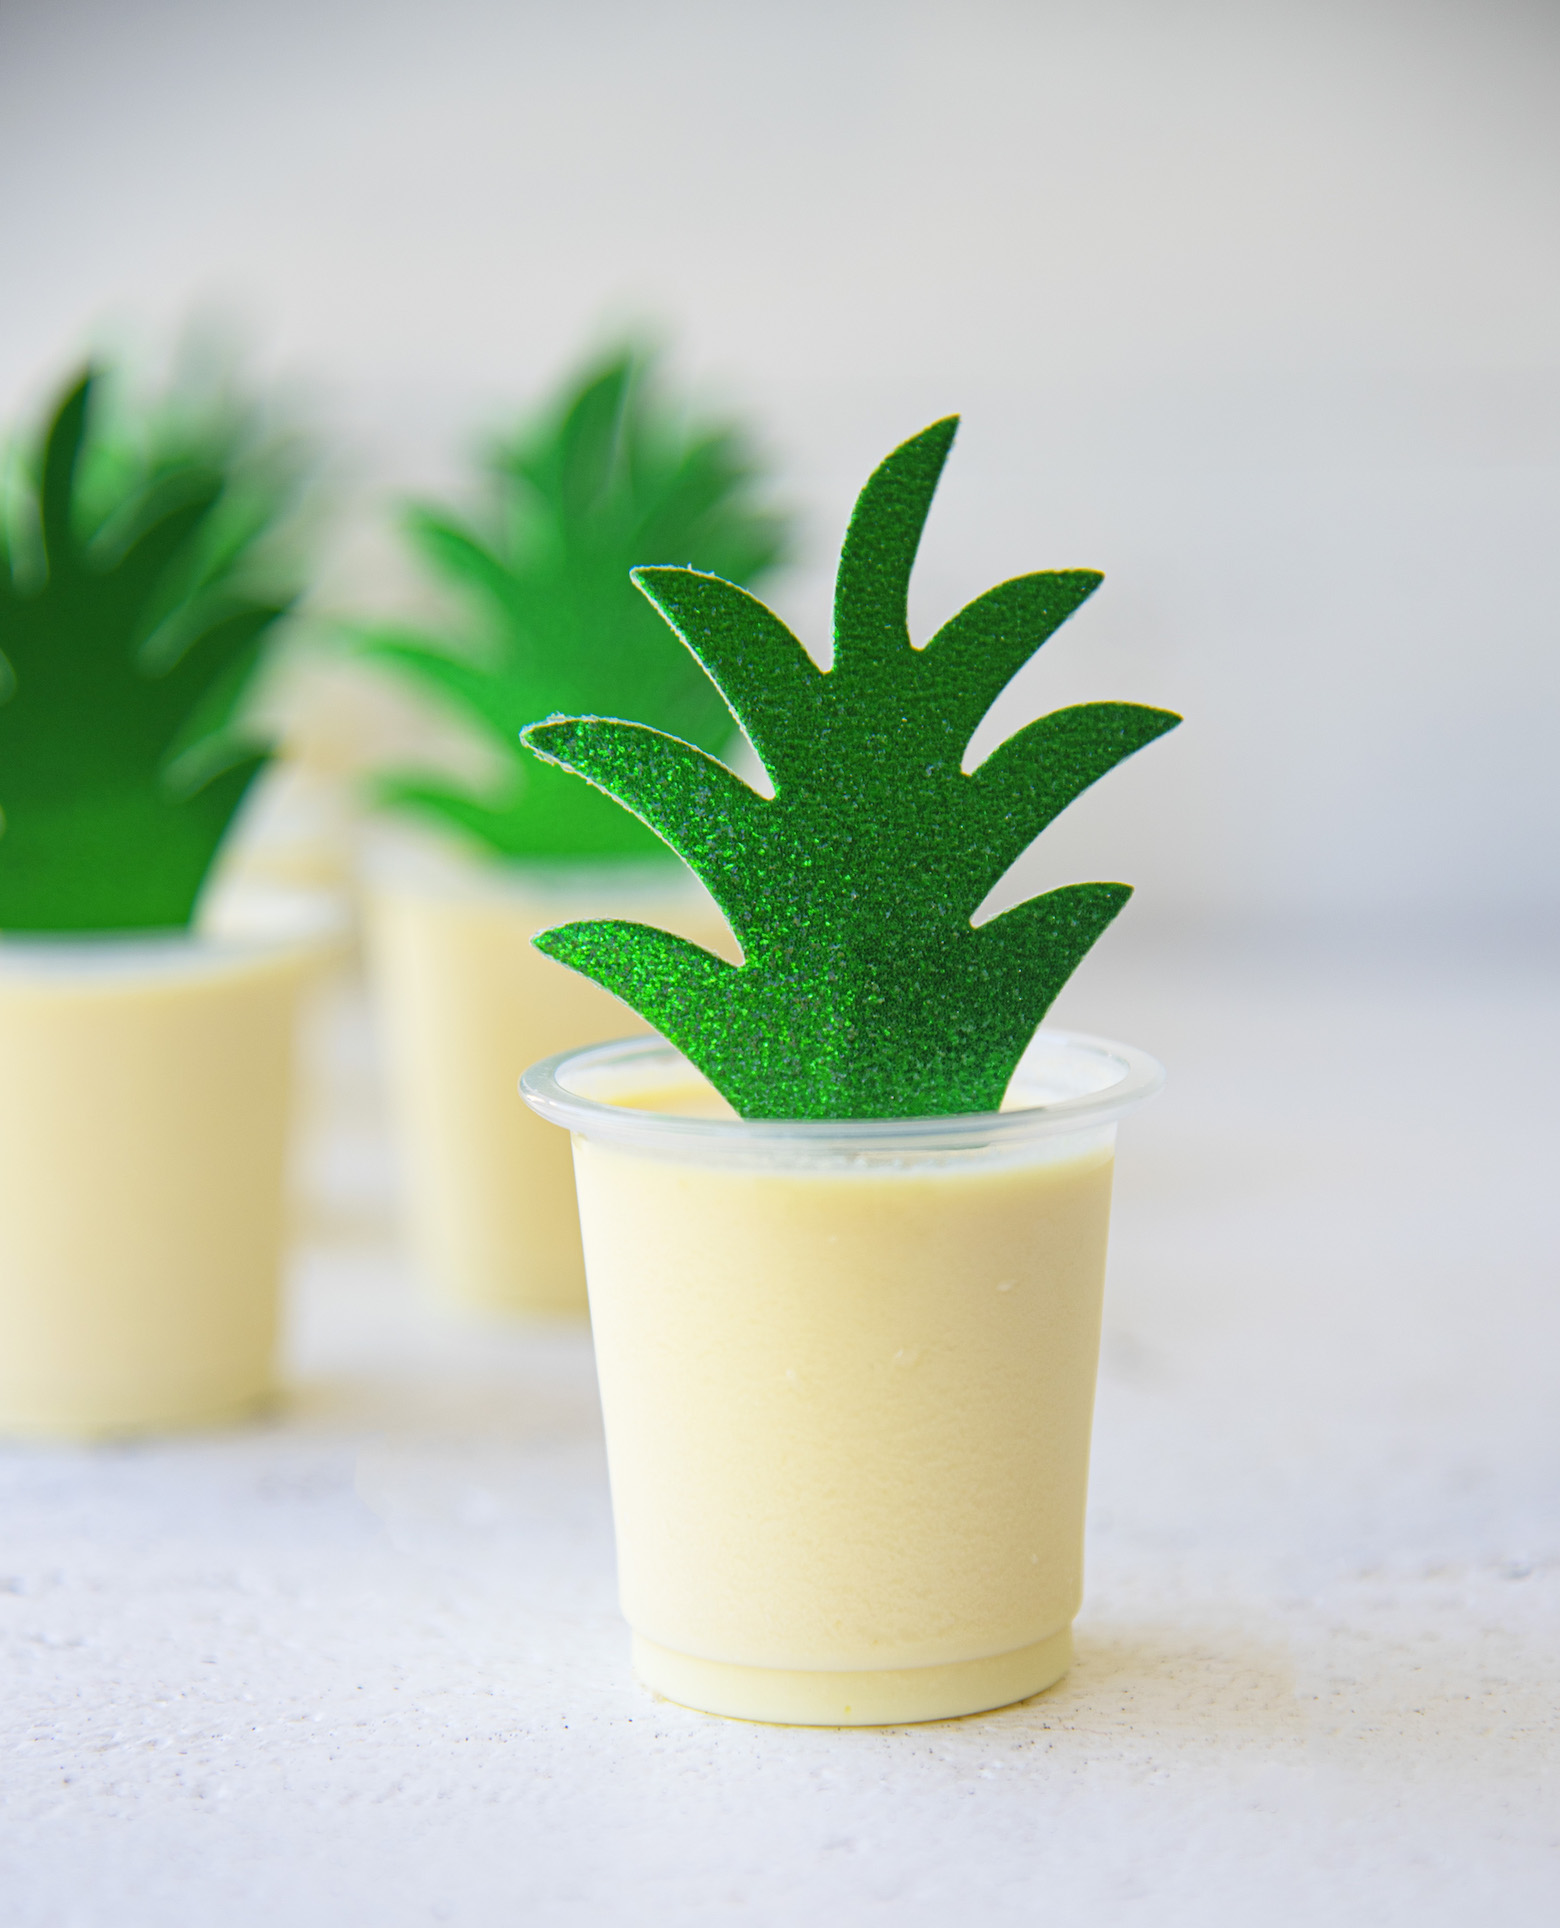 Dole Whip Pineapple Jello Shots are part of the Best Jello Shot Recipes Round up. This photo has the yellow Dole Whip shots with a sparkly leaf coming up out of it. 